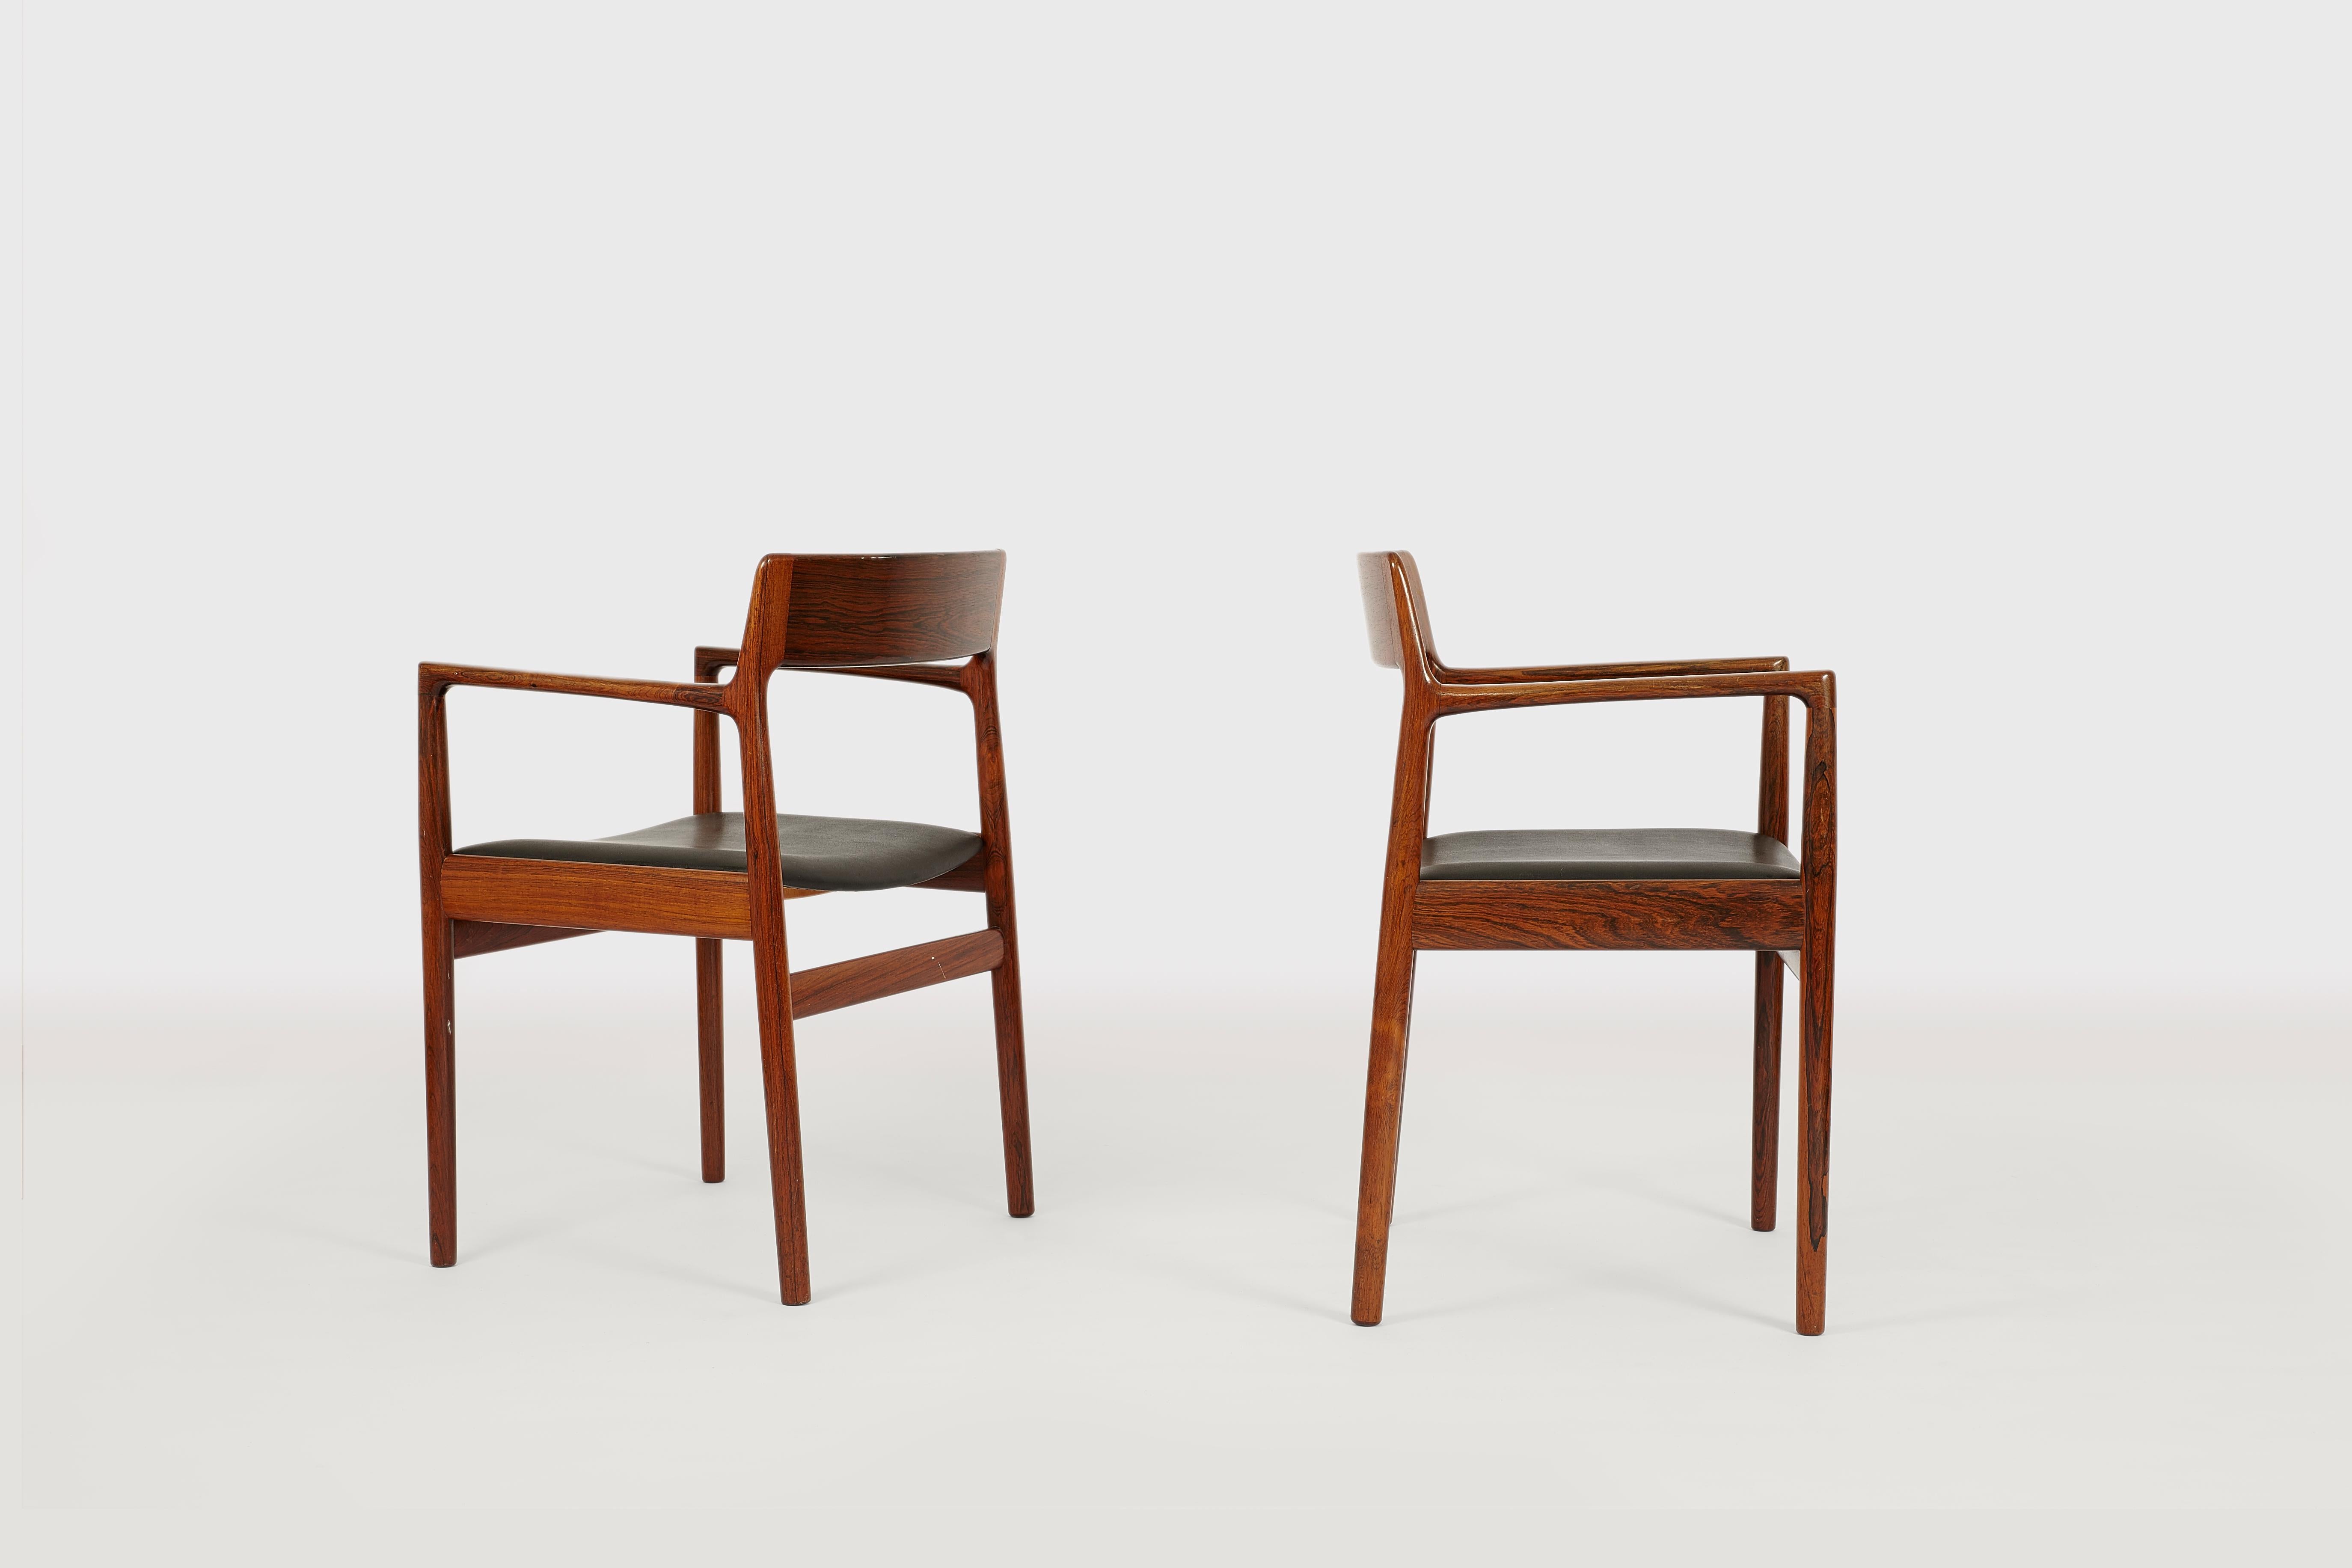 A beautiful pair of massive dining chairs probably Niels O. Møller, Denmark produced by Rodding Denmark Norgard Furniture Factory. Both chairs are in an excellent condition and made of beautiful grained rosewood and black skai. Wonderful design and